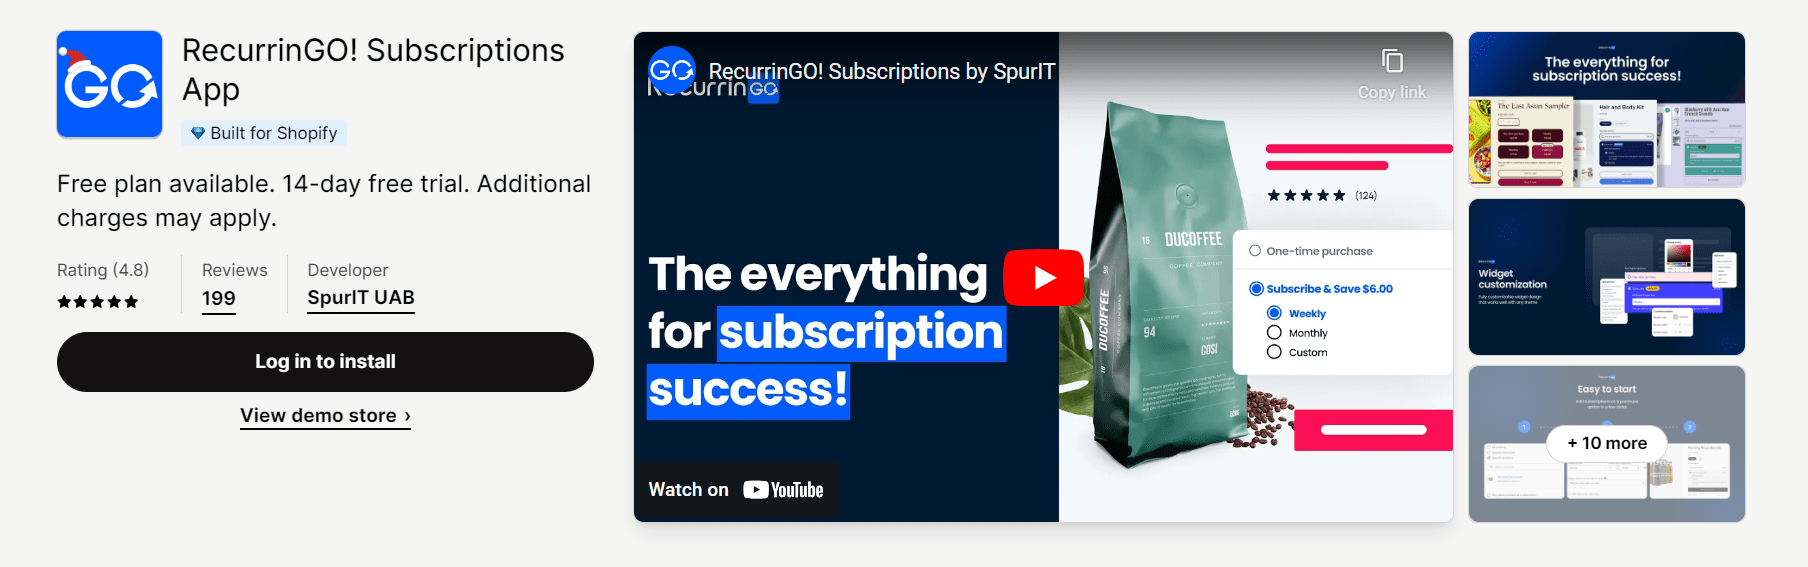 Best Subscription apps for Shopify: RecurringGo.